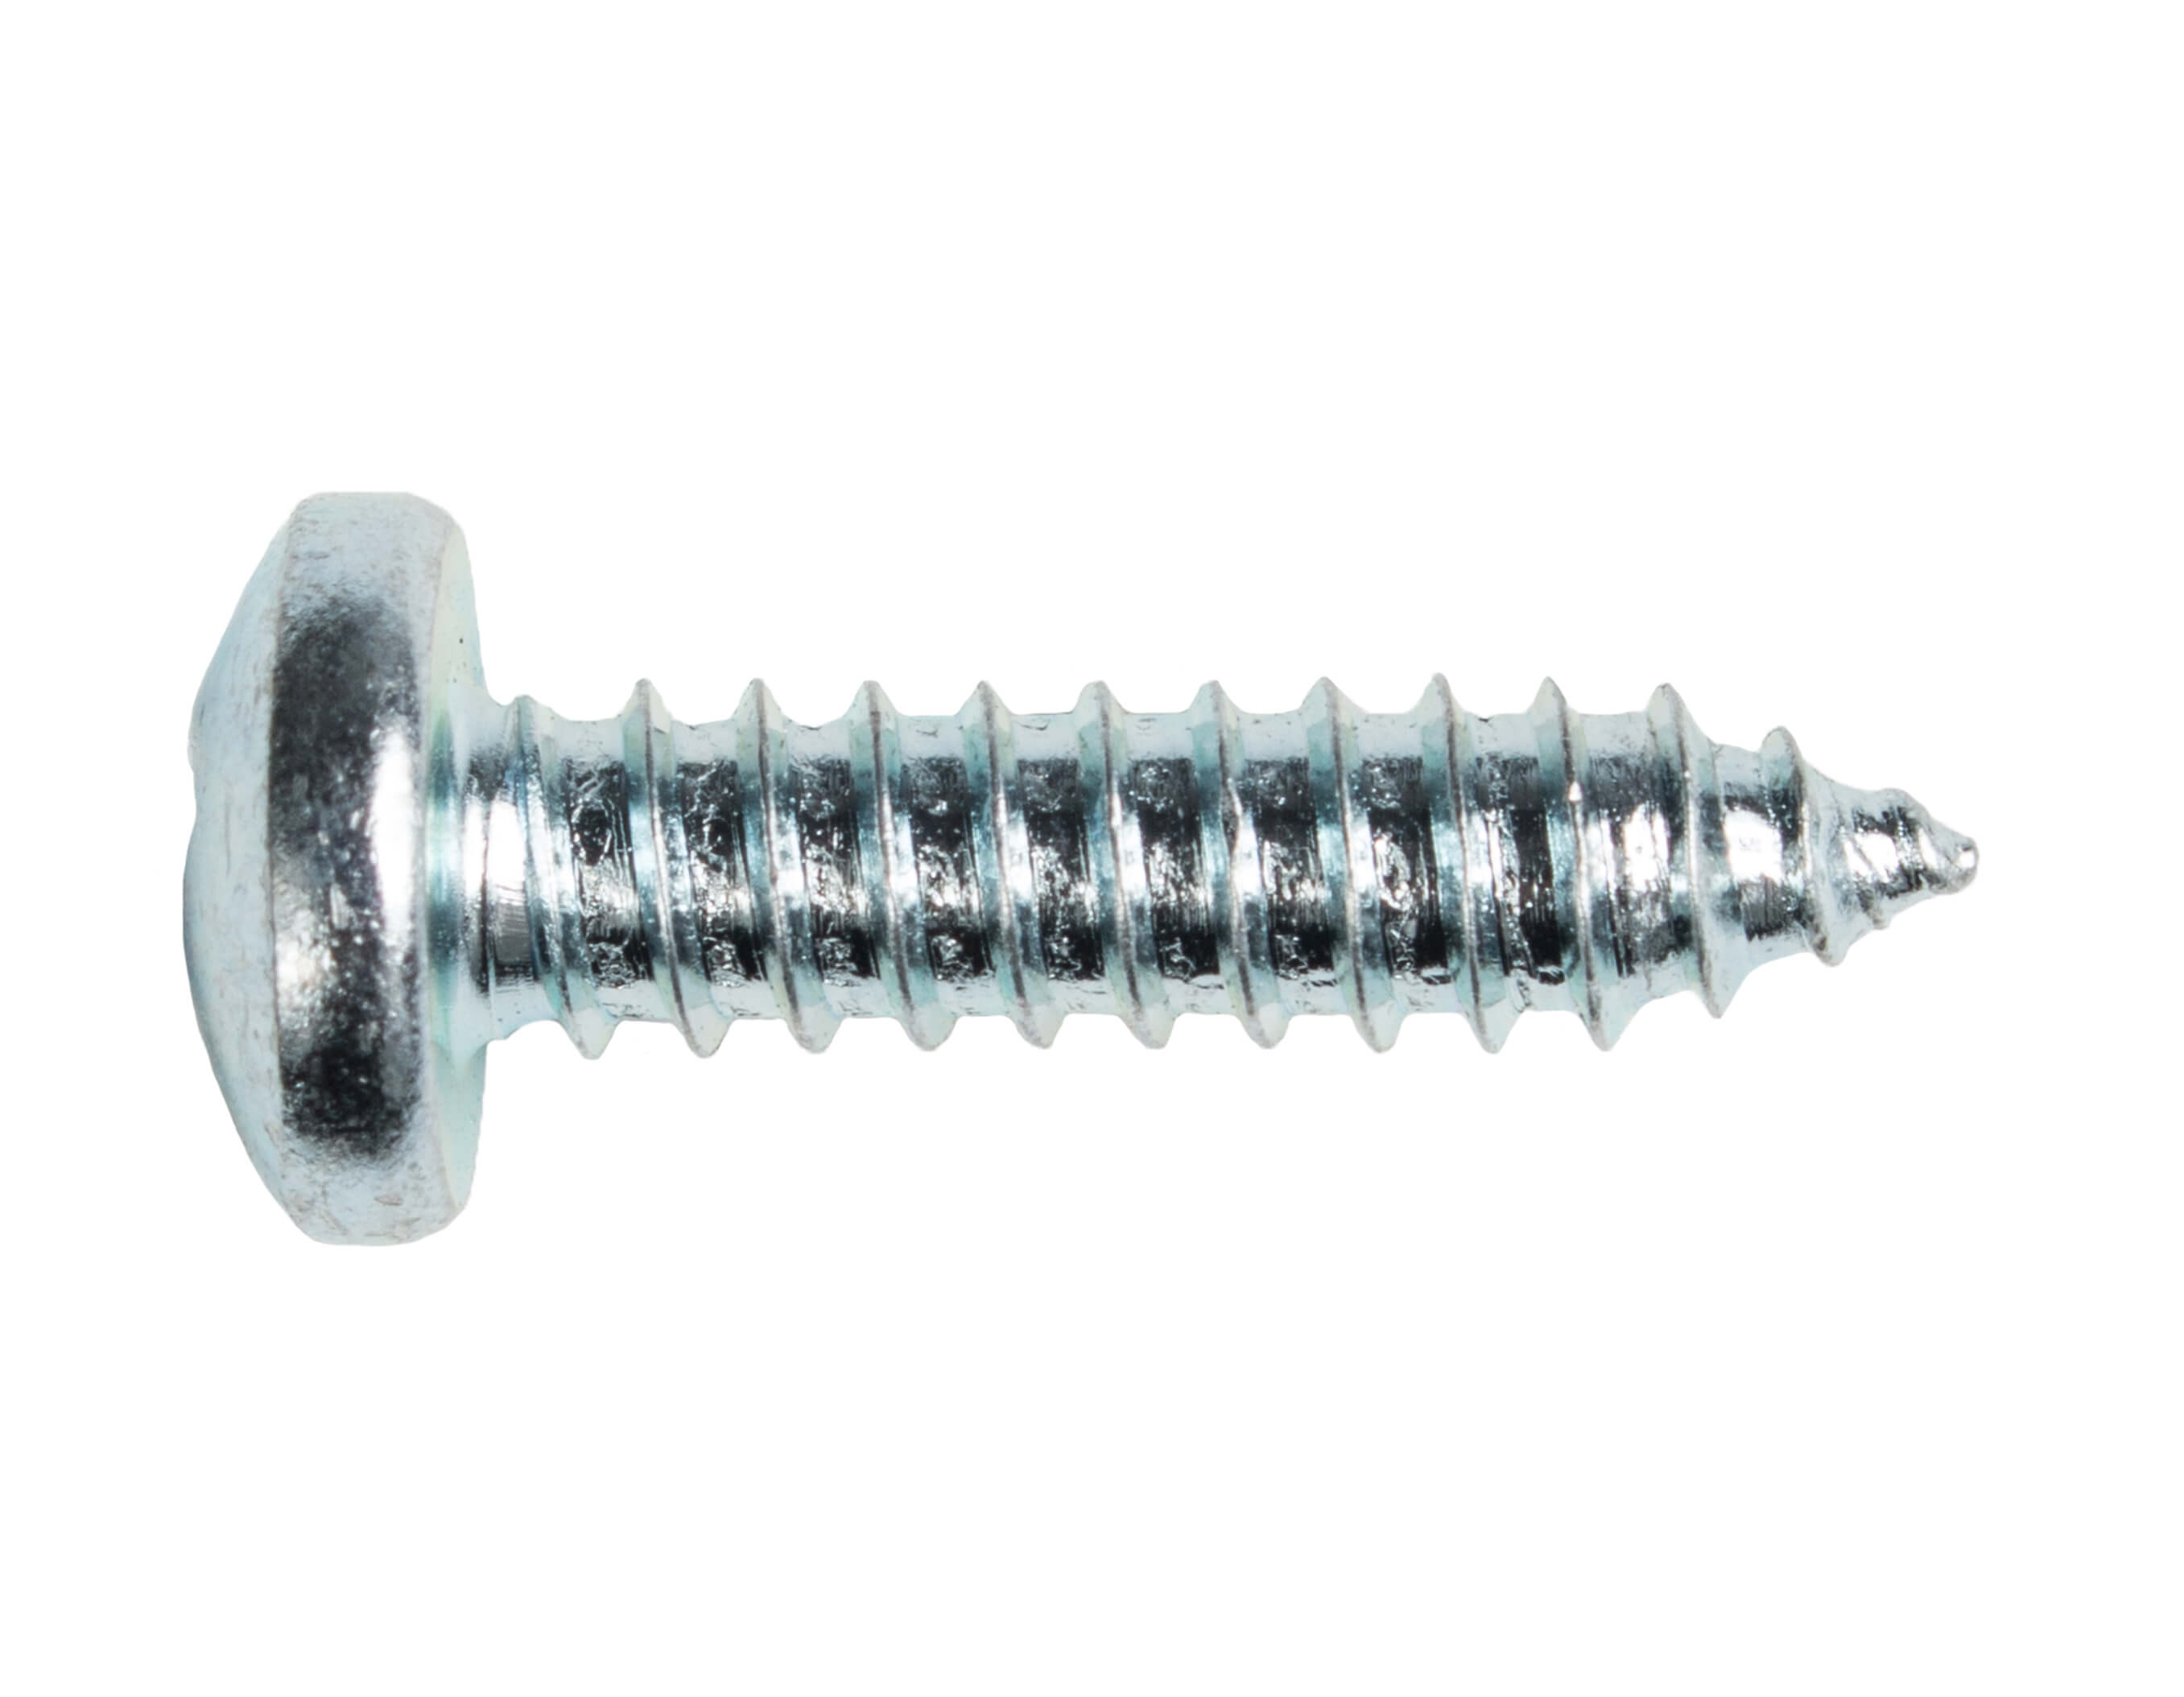 4.8X25 SMS (TAPPING) SCREW PAN PH ZN DIN7981